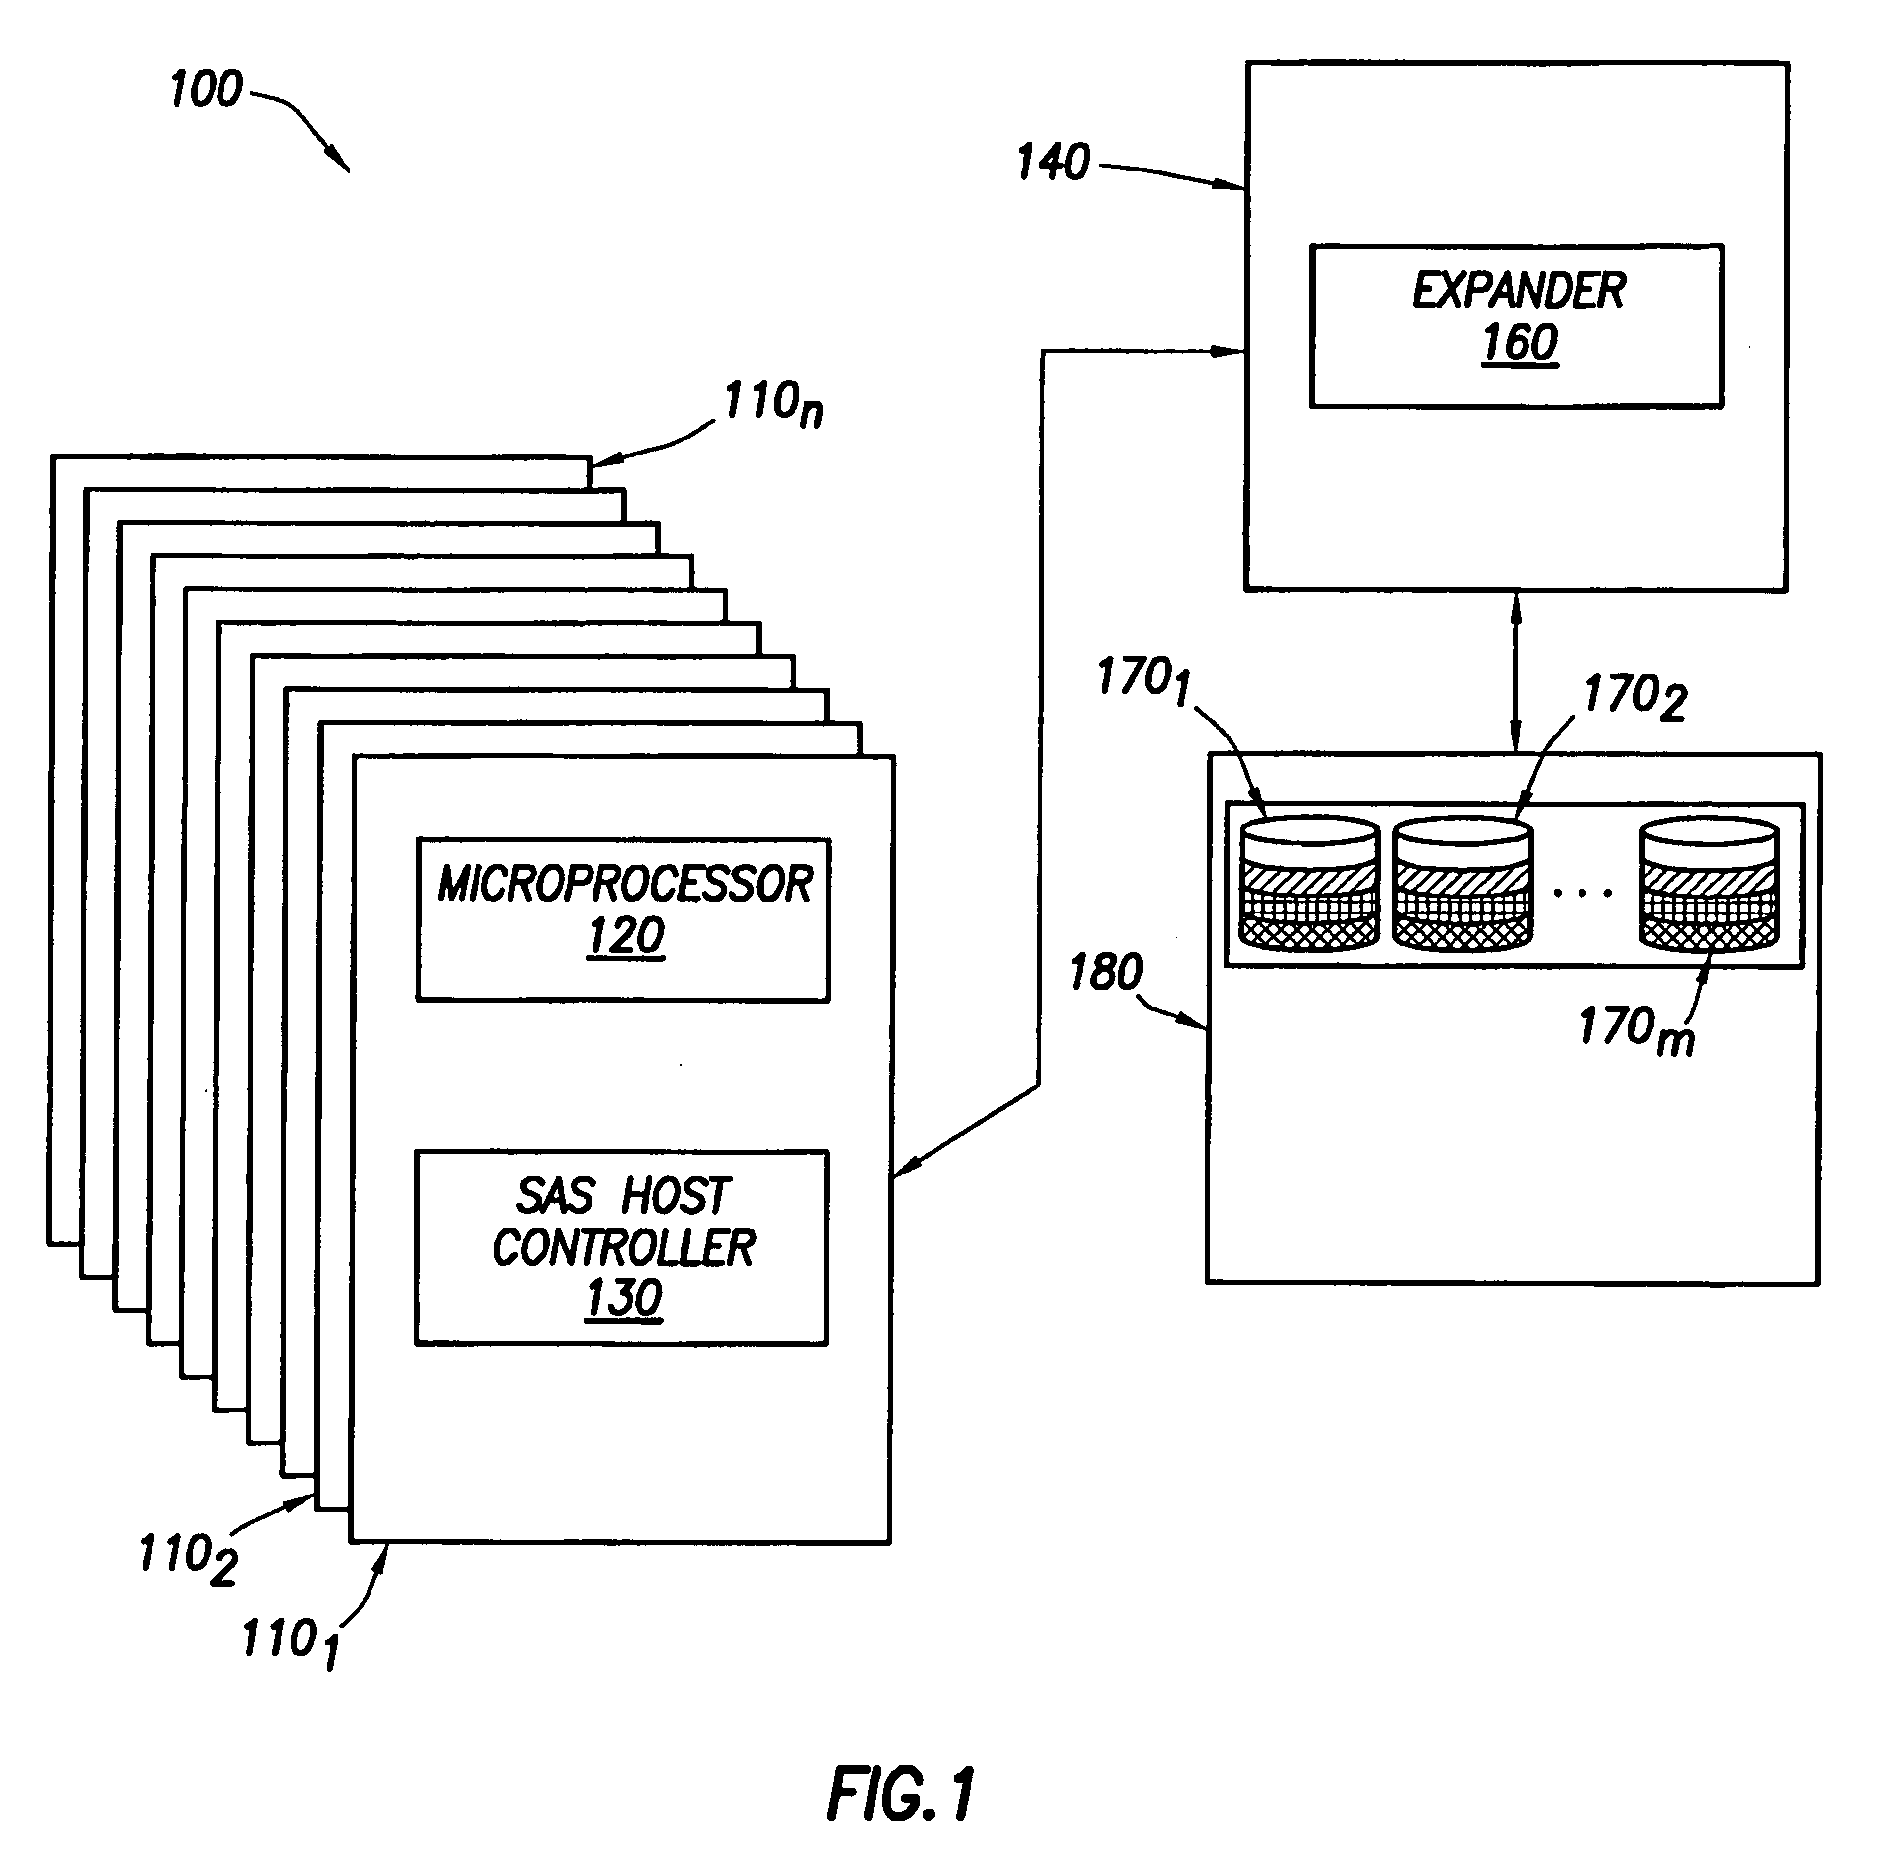 Method for host bus adapter-based storage partitioning and mapping across shared physical drives